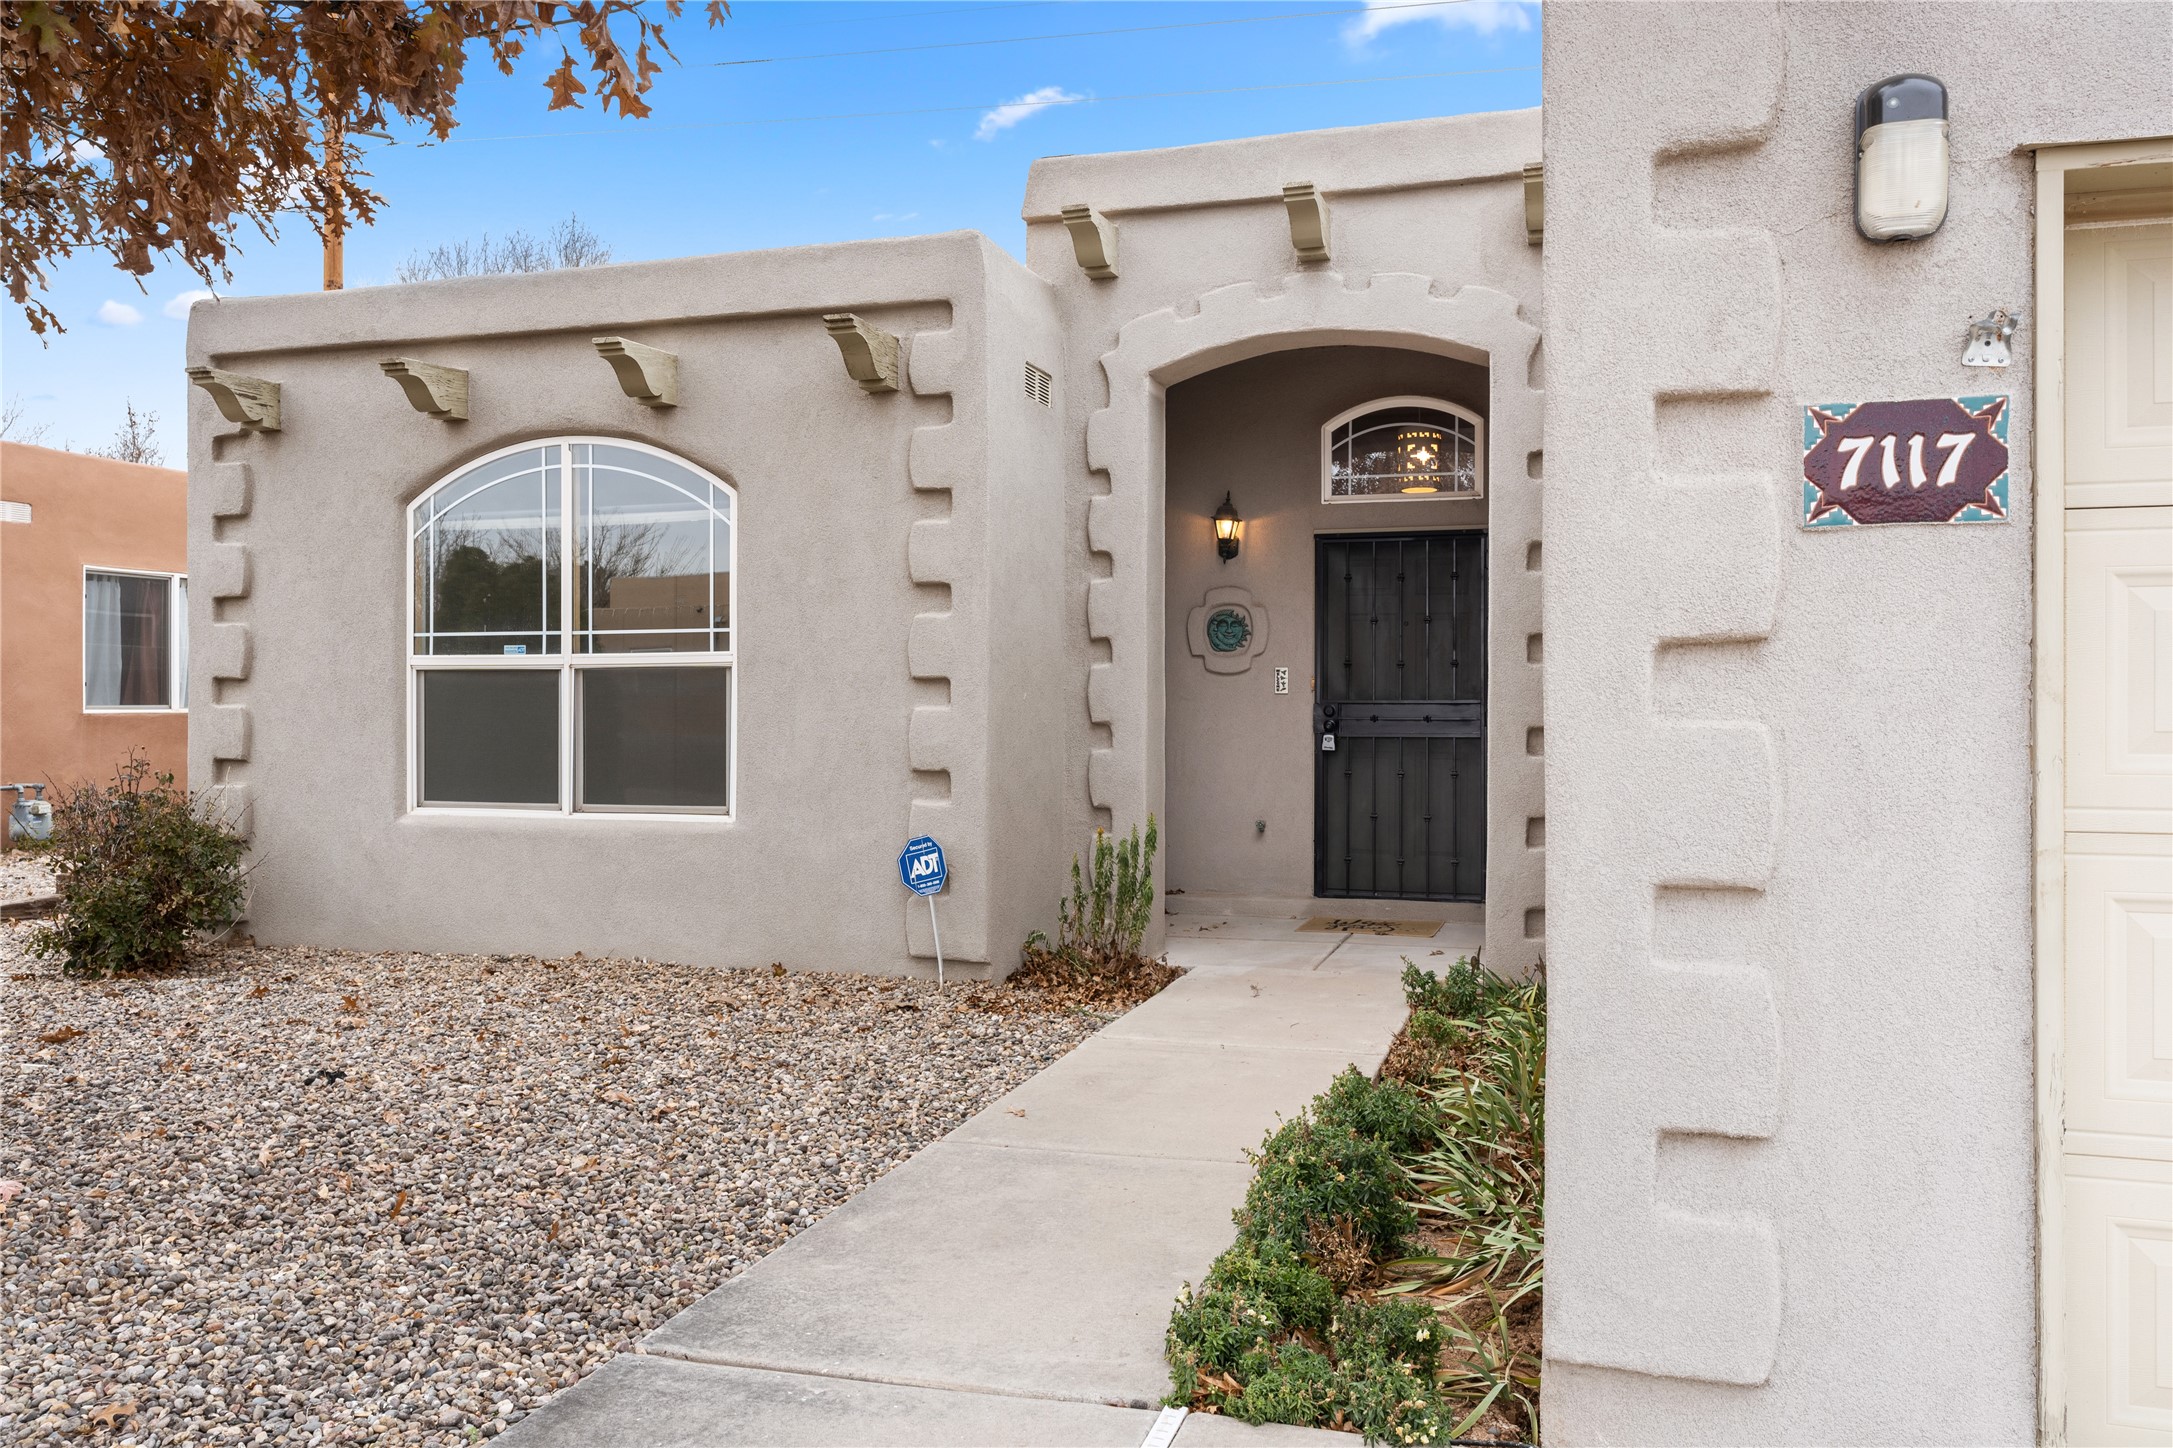 7117 CALLE JENAH, Santa Fe, New Mexico 87507, 3 Bedrooms Bedrooms, ,2 BathroomsBathrooms,Residential,For Sale,7117 CALLE JENAH,202234095